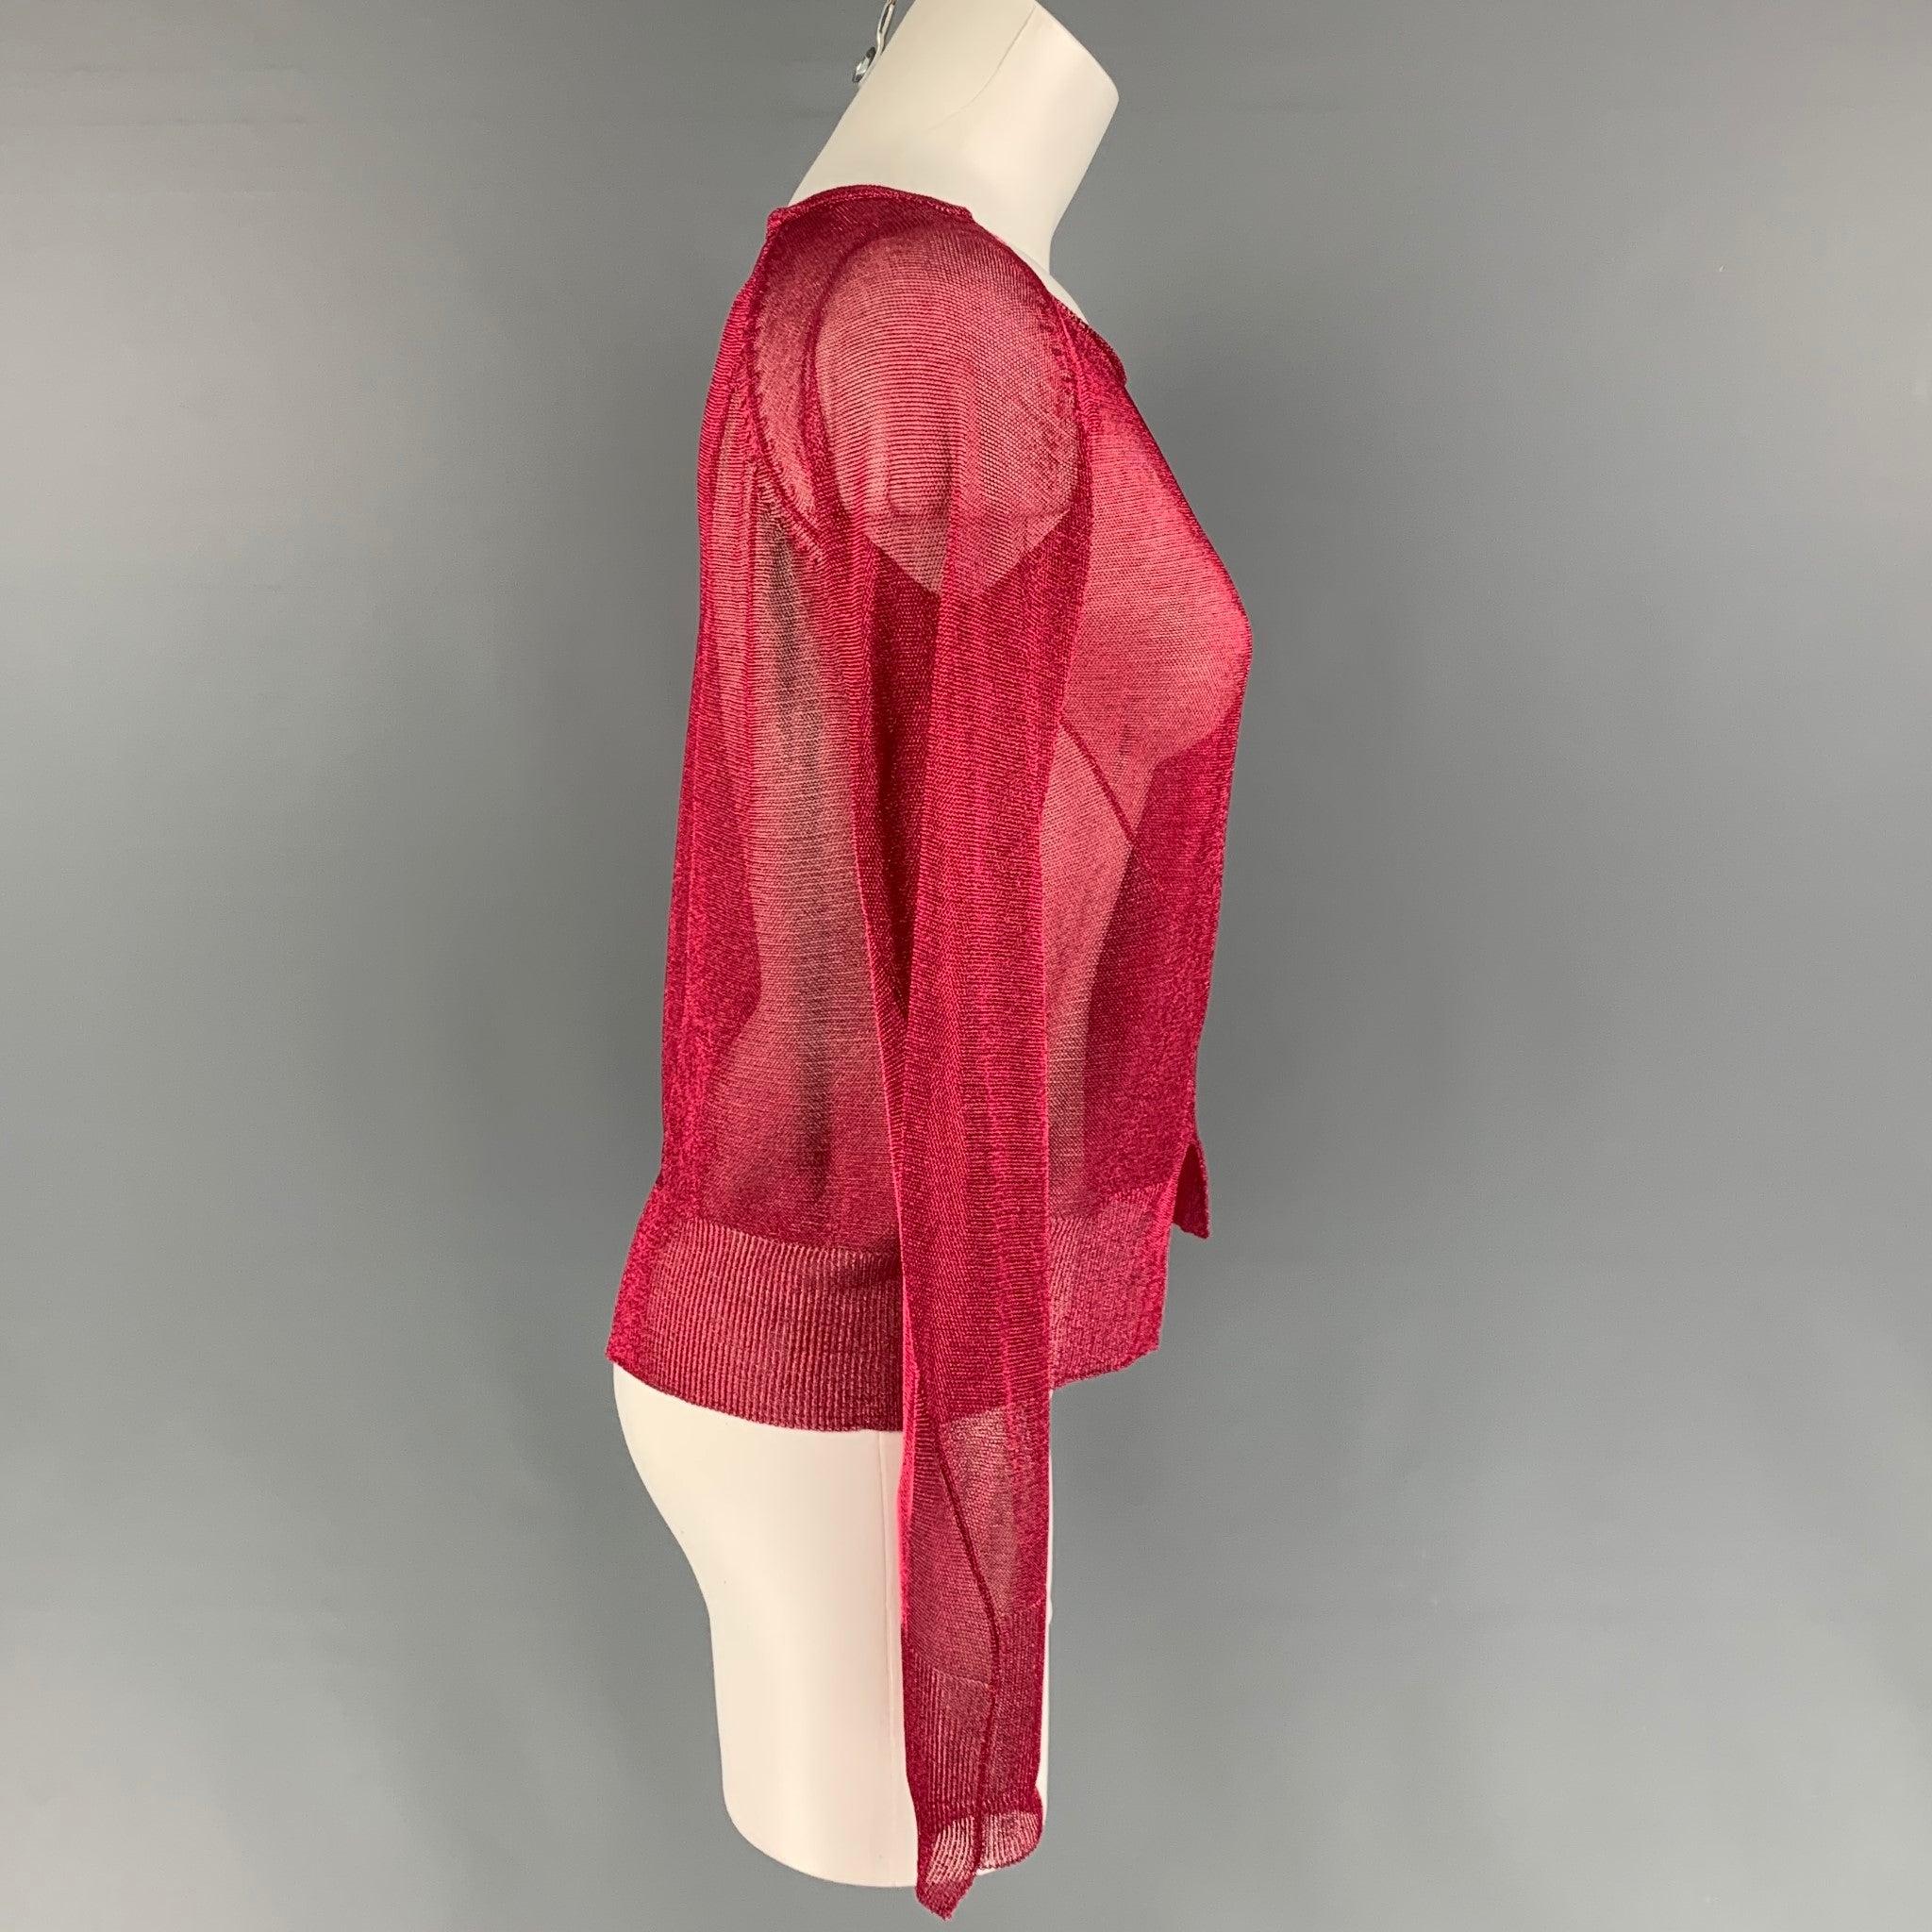 THE ROW 'Giro Vented' top comes in a red metallic viscose blend featuring a boat neck, long sleeves, and a pullover style. Made in Italy.
Excellent
Pre-Owned Condition. 

Marked:   XS 

Measurements: 
 
Shoulder: 16 inches  Bust: 34 inches  Height: